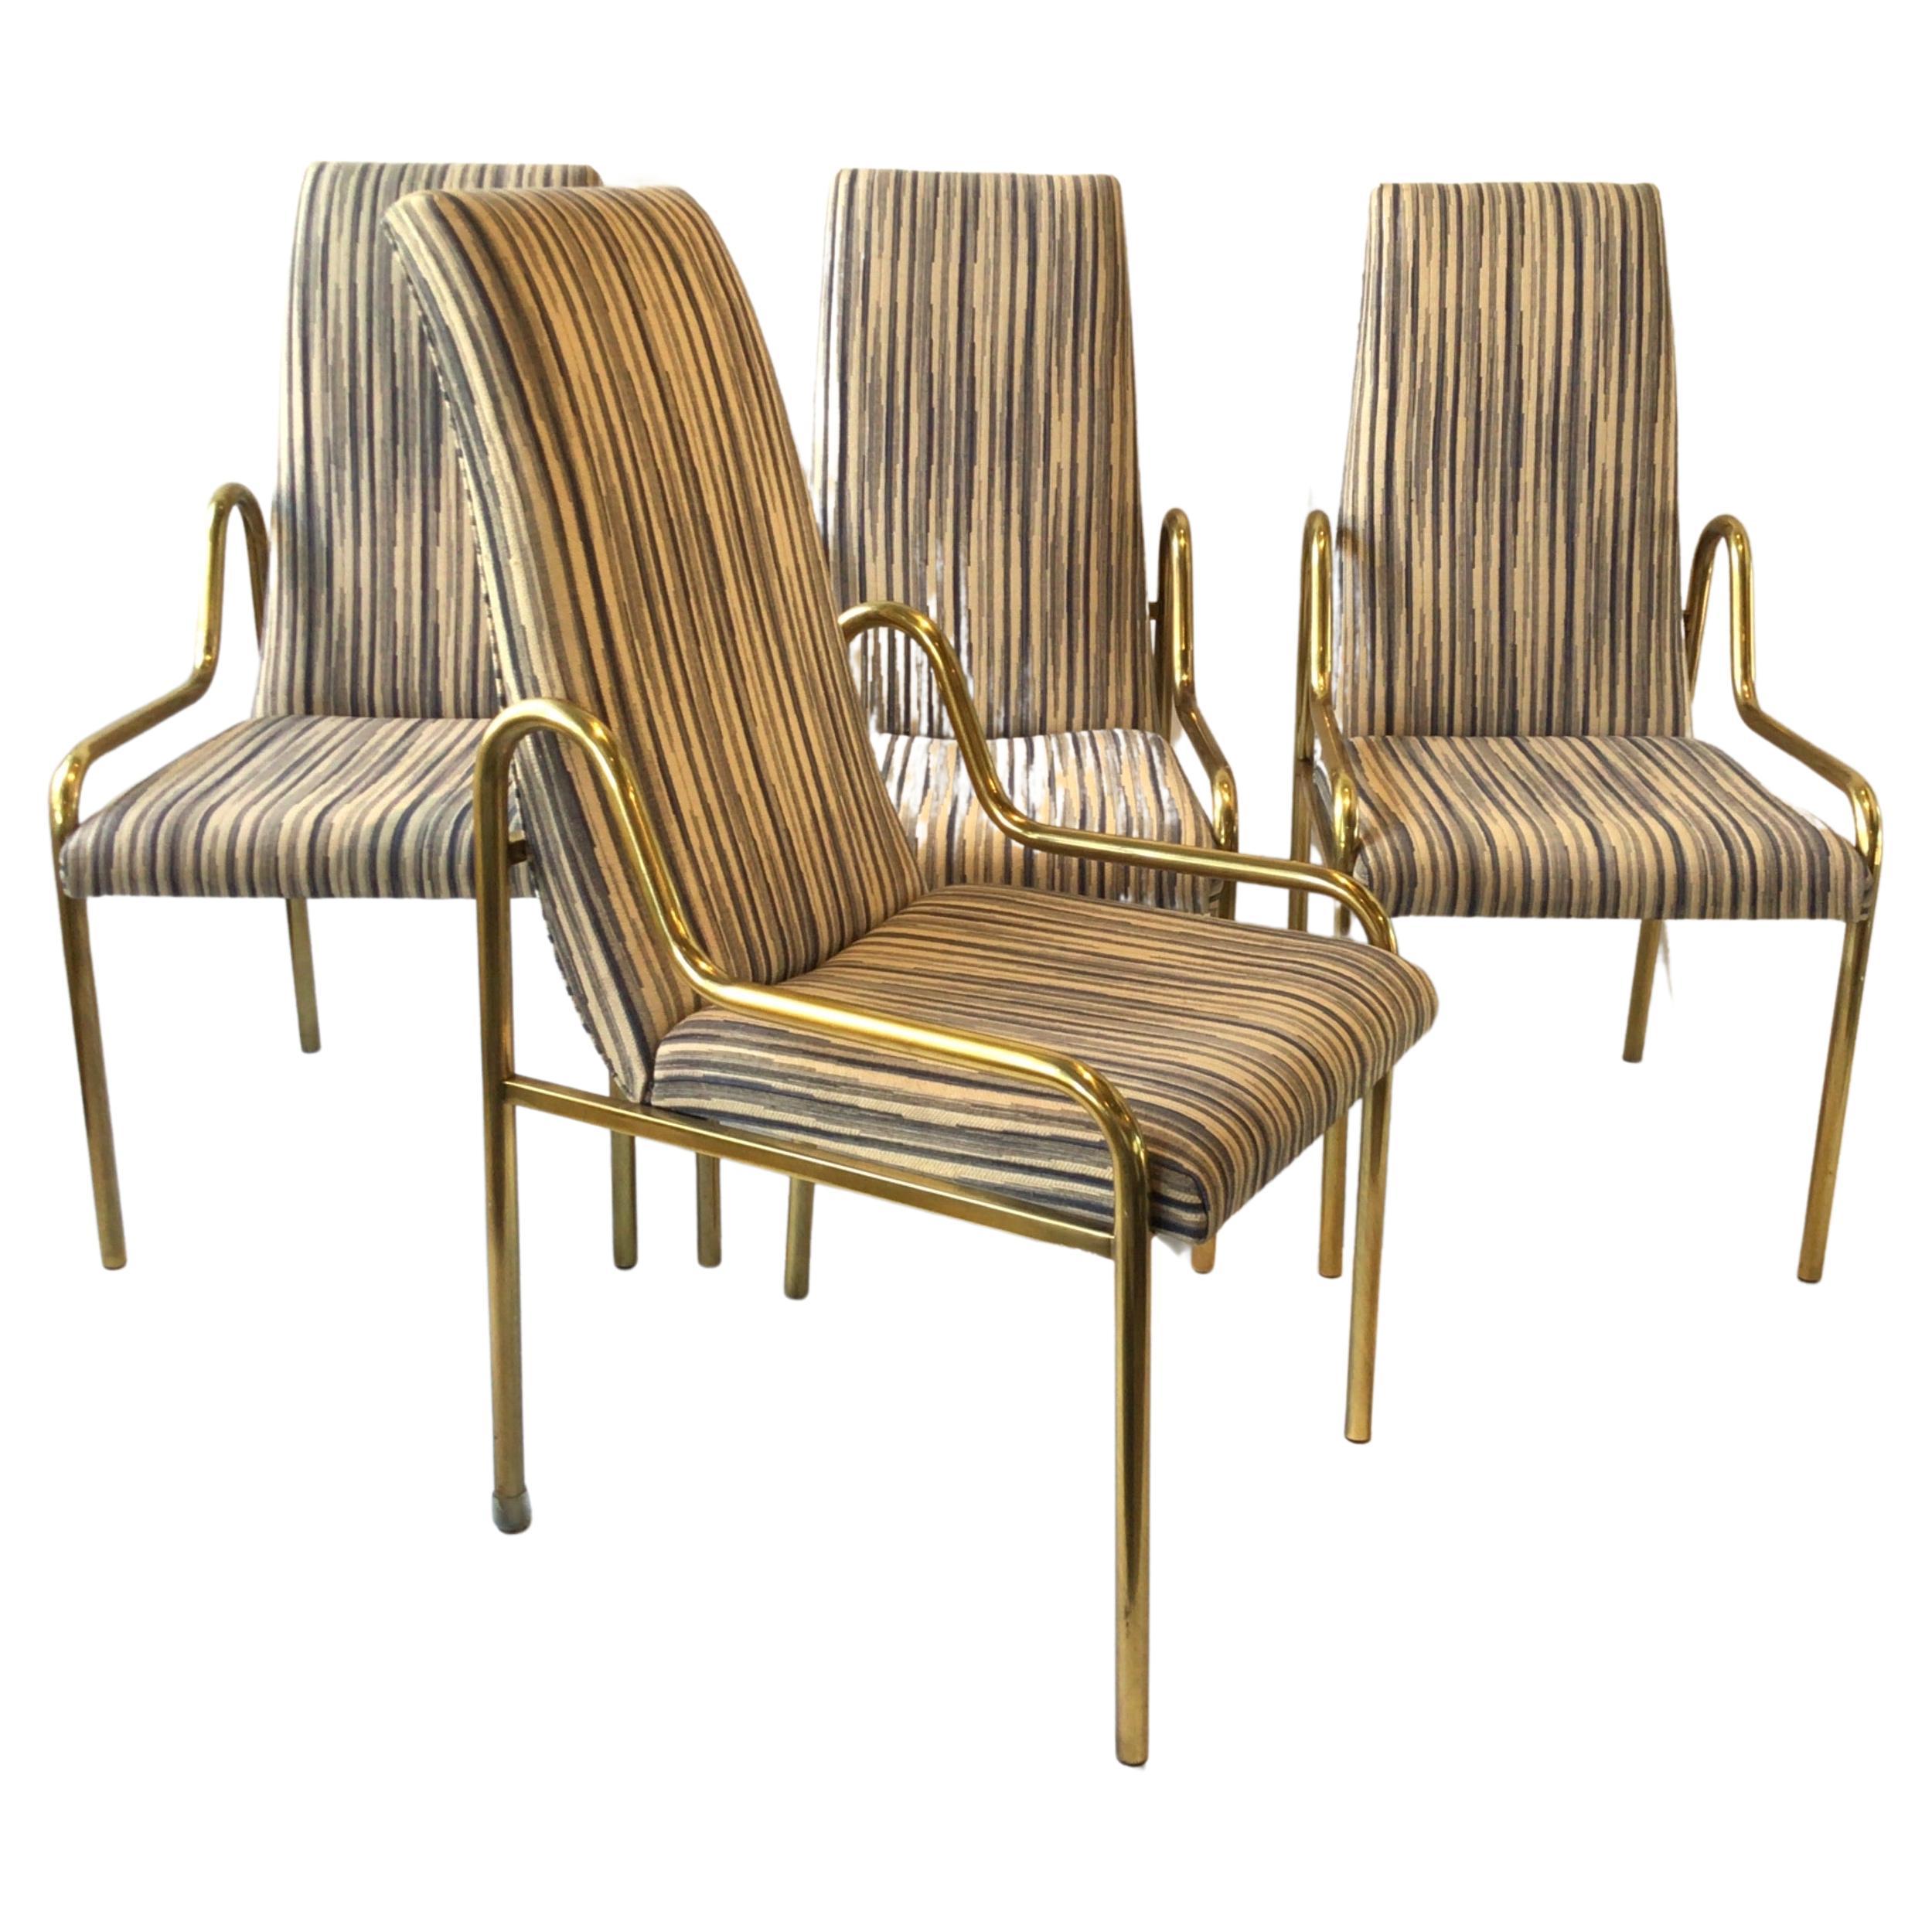 4 Brass Mastercraft Dining Chairs For Sale